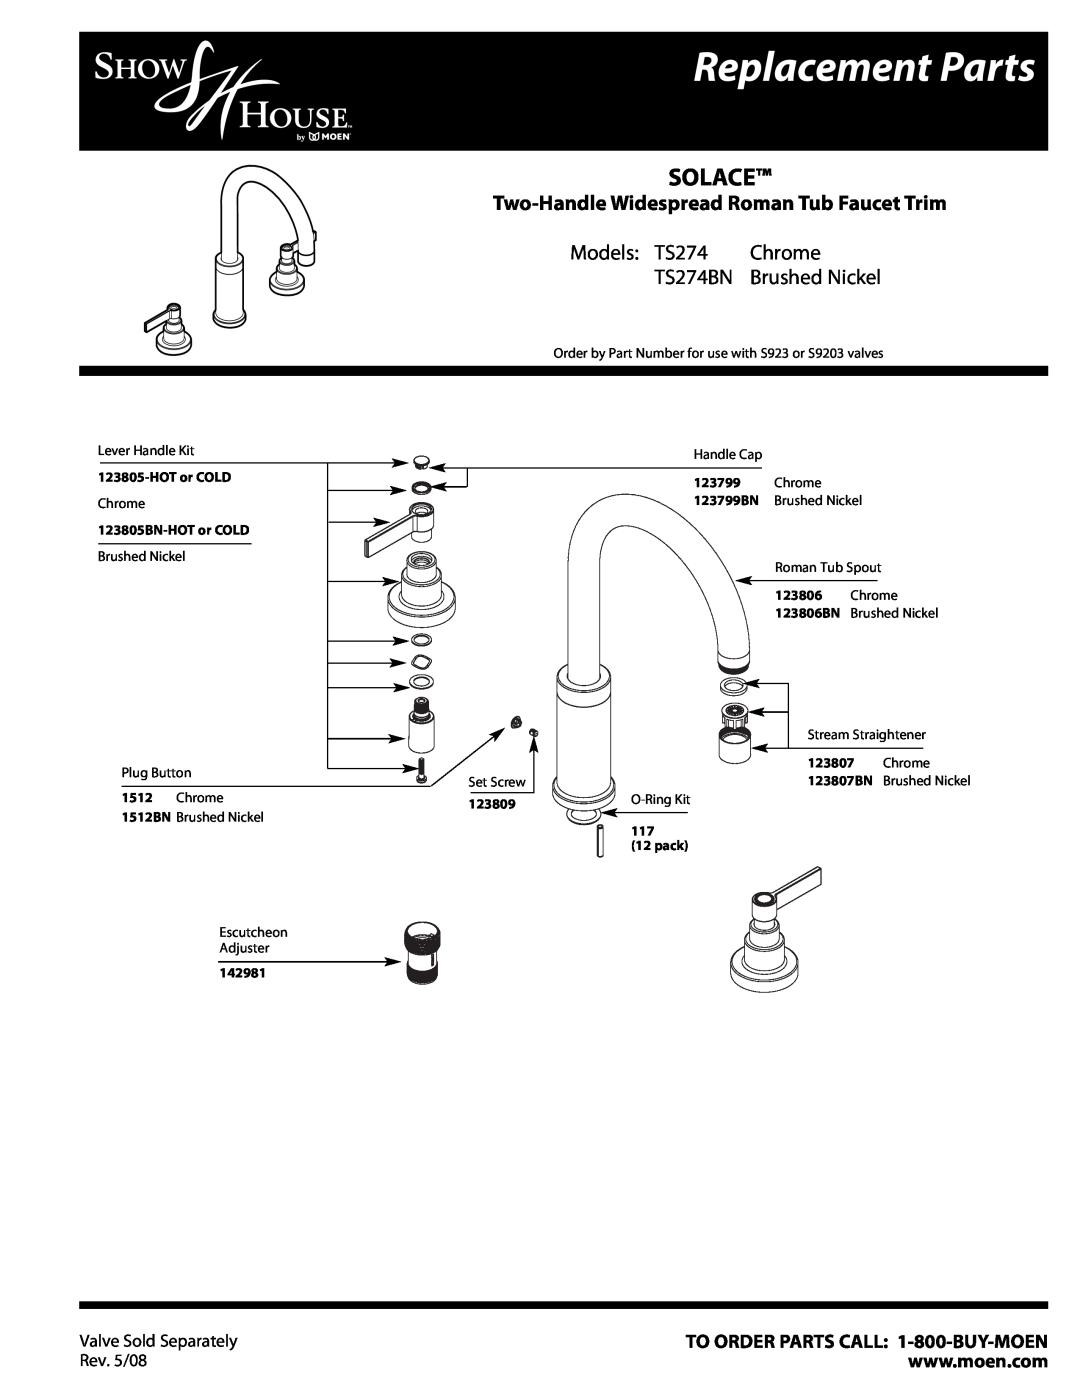 Moen TS274 Chrome manual Replacement Parts, Solace, Two-Handle Widespread Roman Tub Faucet Trim, Models TS274, TS274BN 